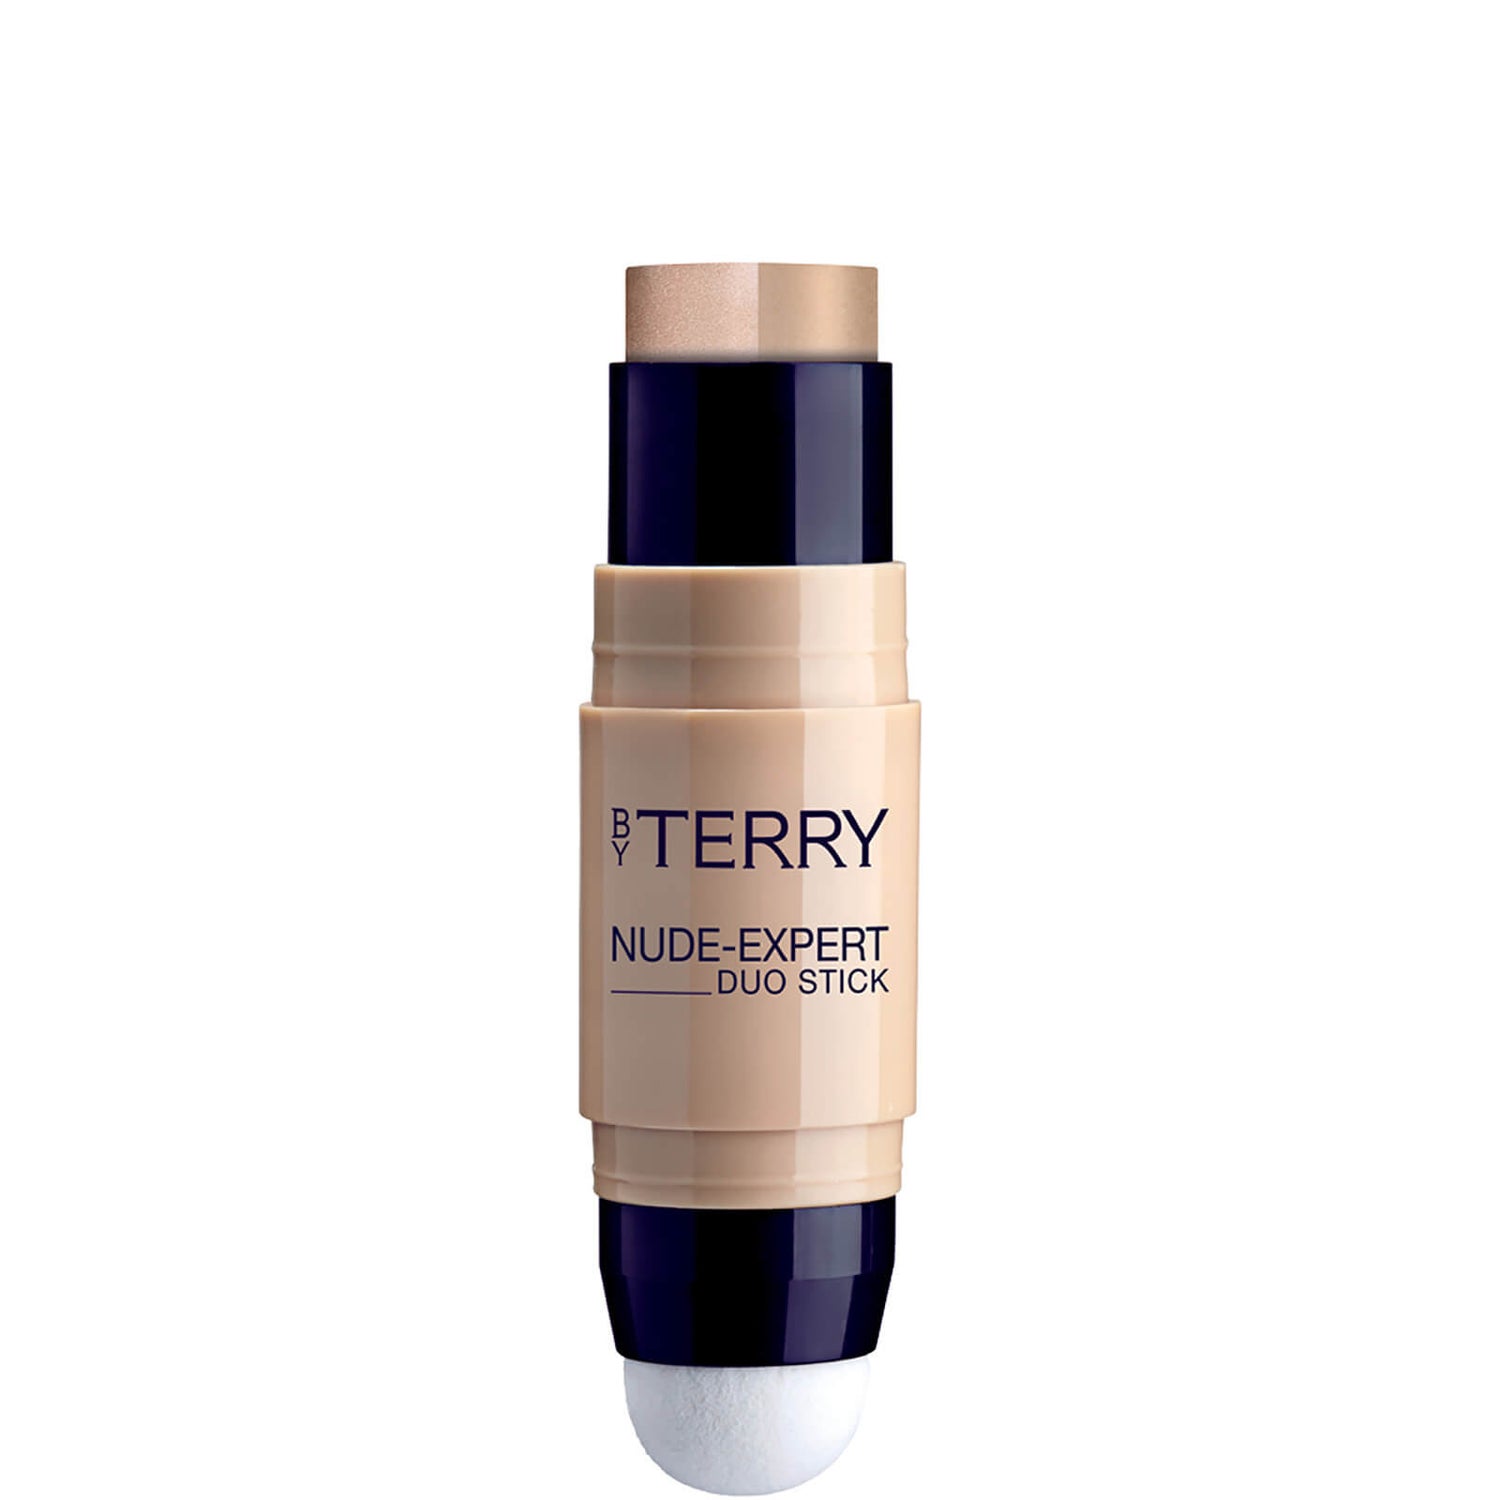 By Terry Nude-Expert Foundation (Various Shades) - 10.  Golden Sand